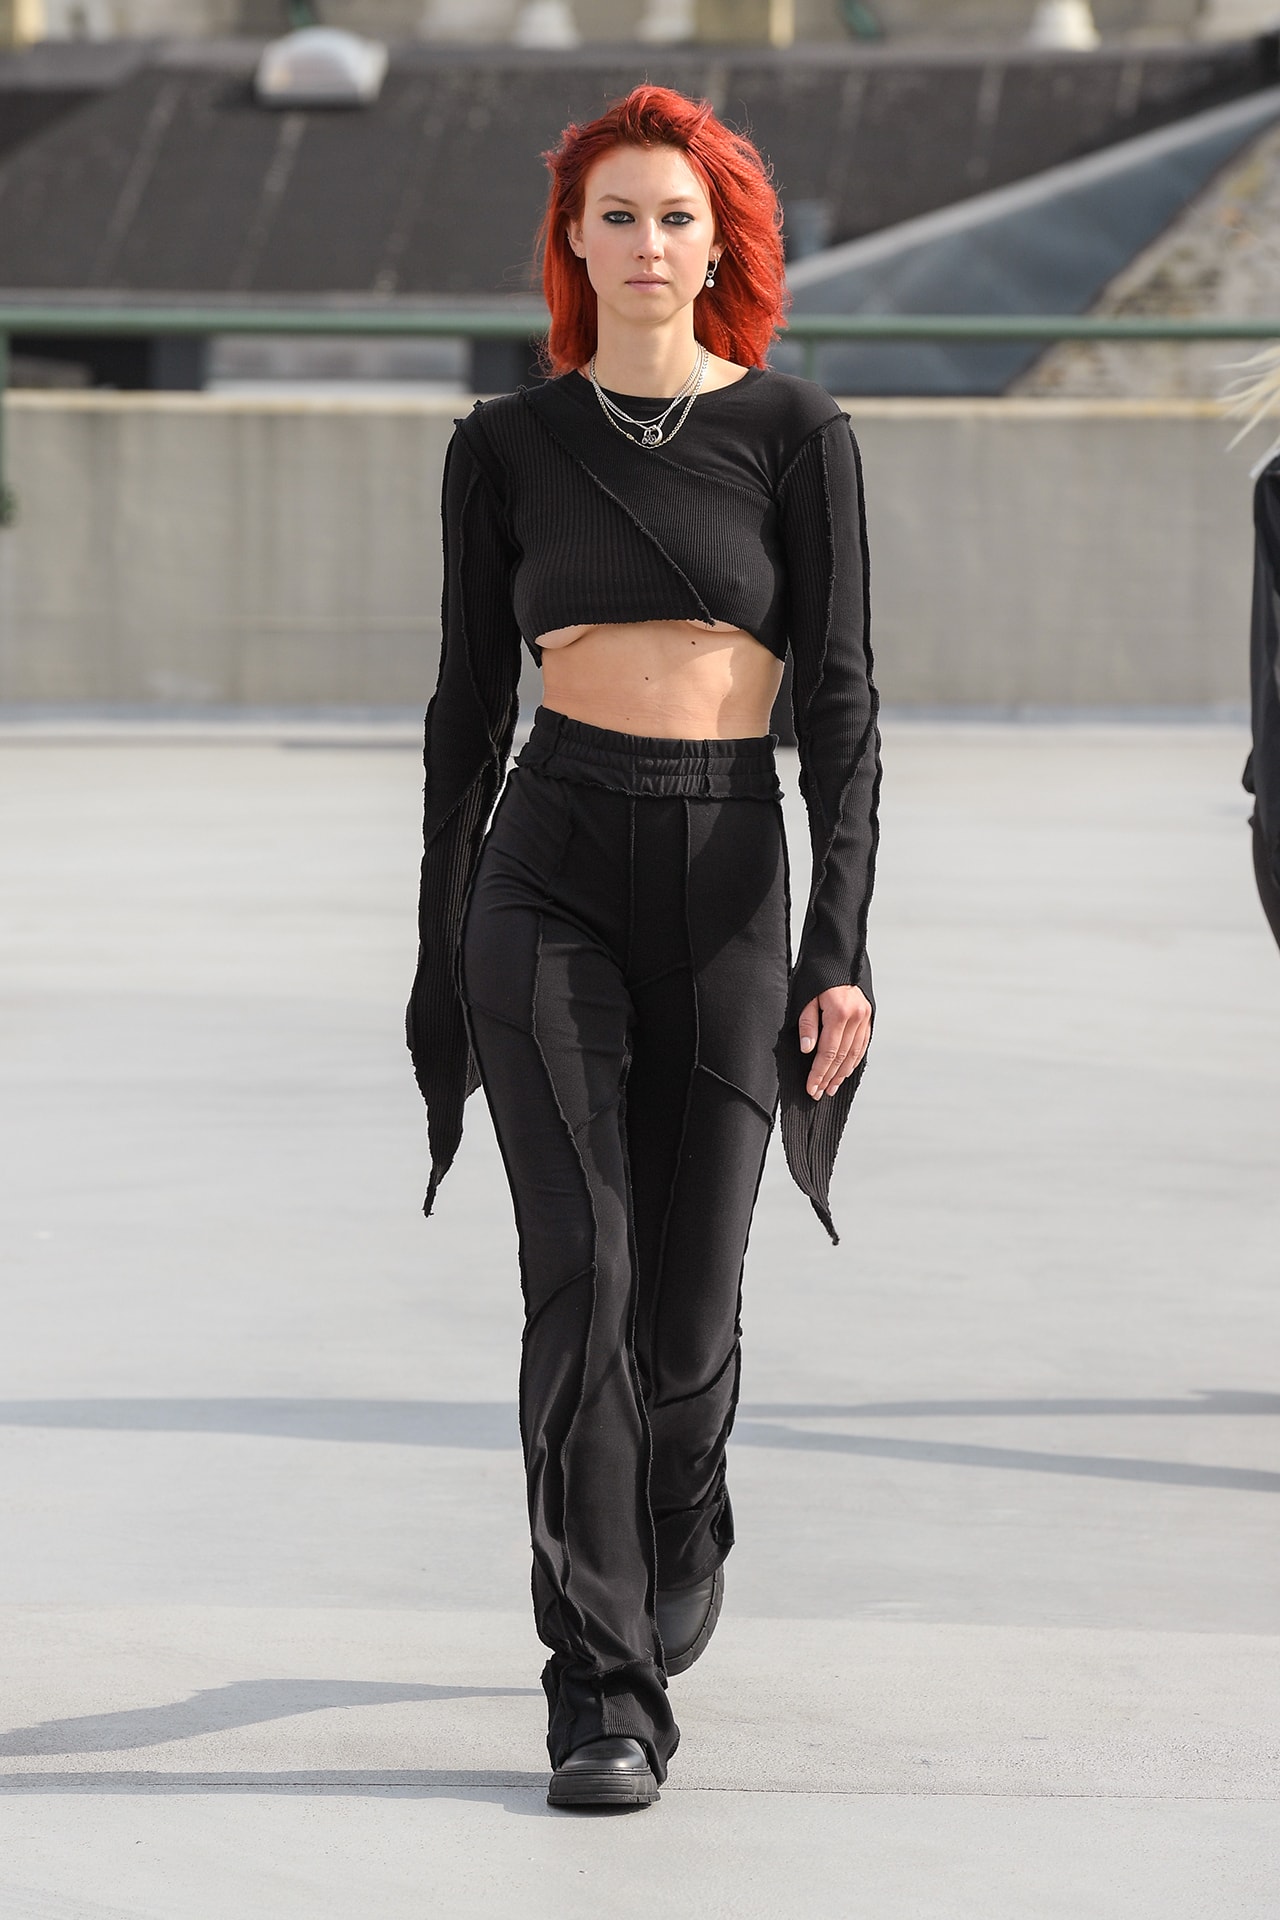 (di)vision Spring Summer 2022 runway show collection division Copenhagen Danish Brand Fashion Design Simon Nanna Wick upcycling crop long sleeves top pants